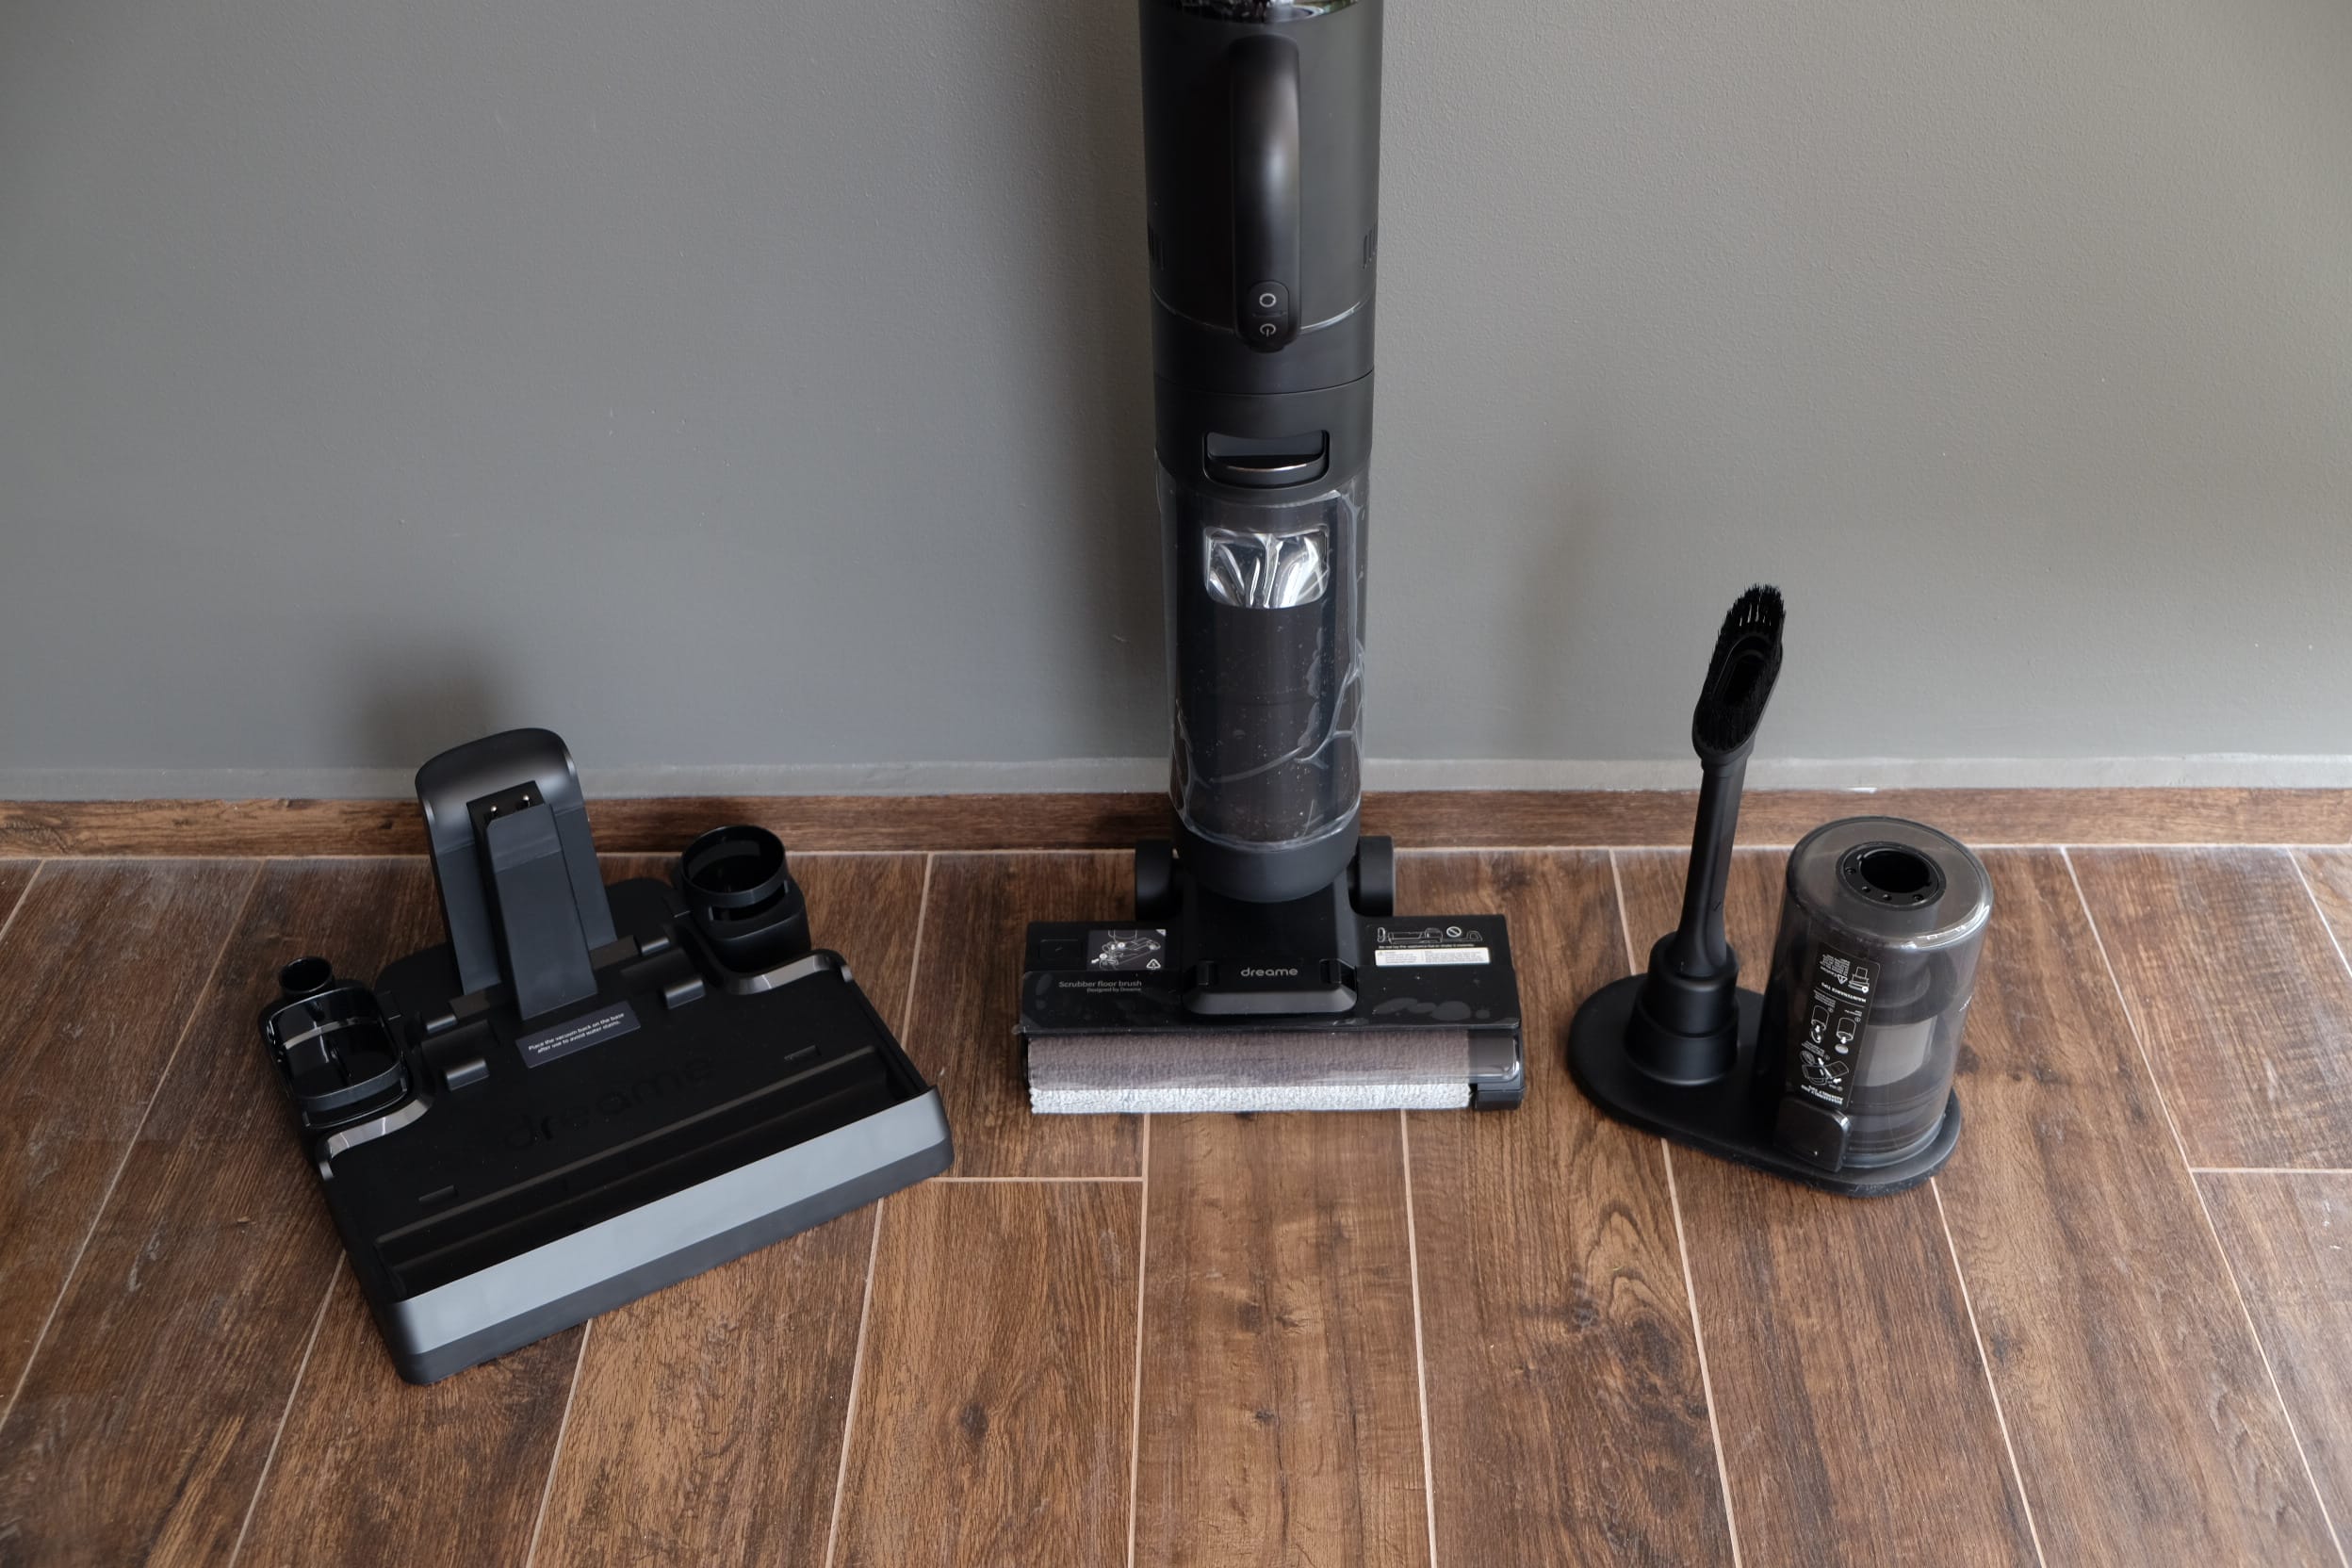 Review: Dreame M12 Jio Cleaner & Wet Vacuum Dry 2-in-1 Tech –